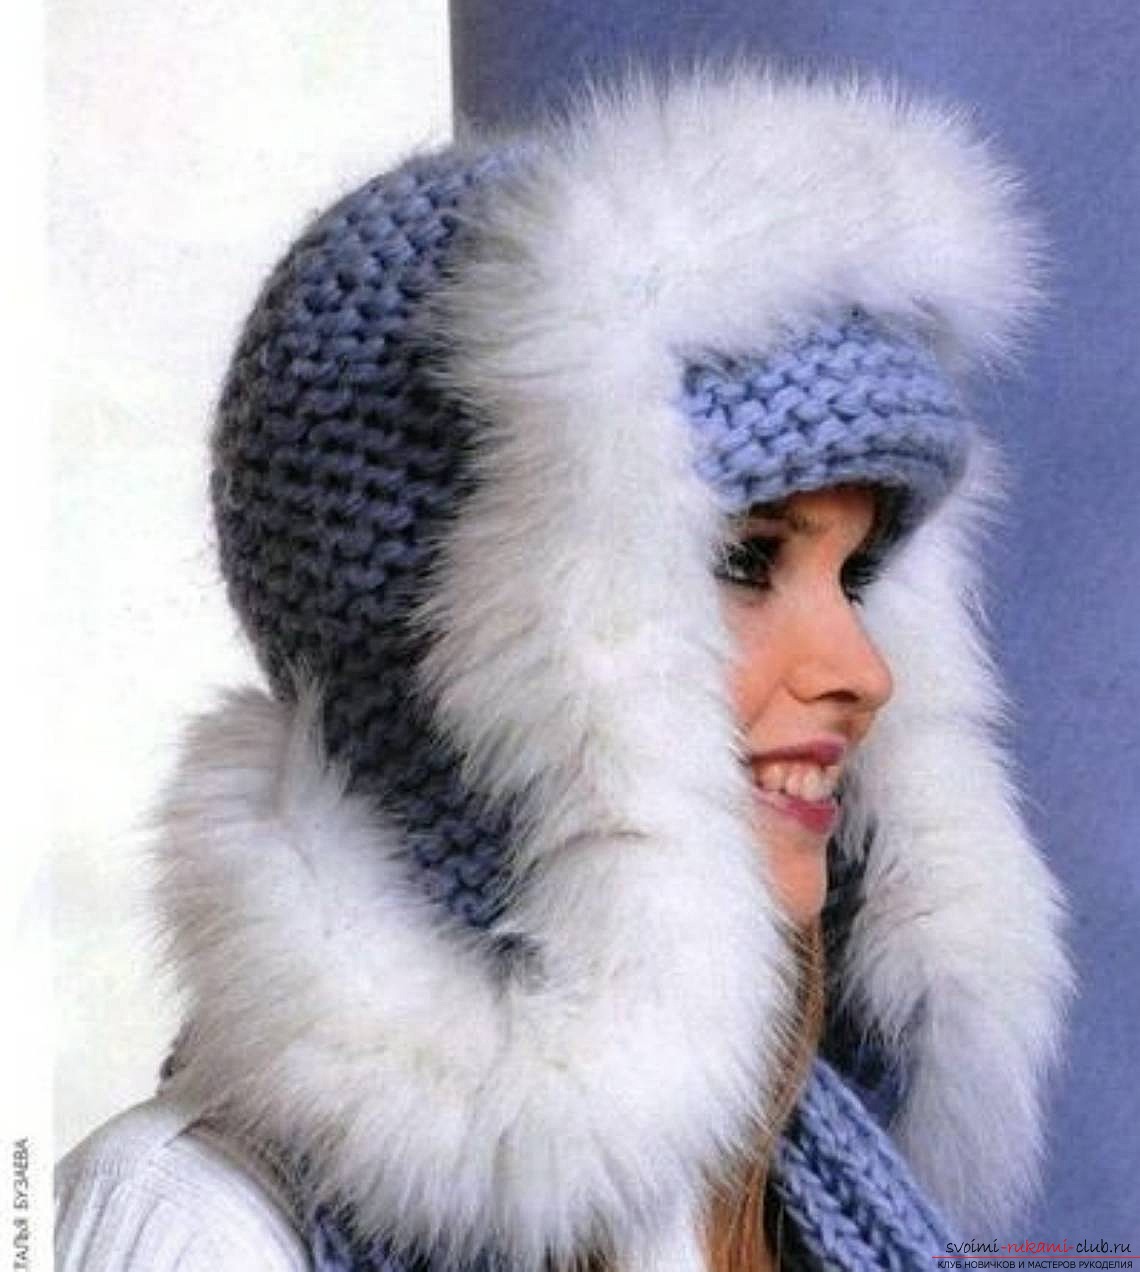 a knitted hat for women. Photo №1